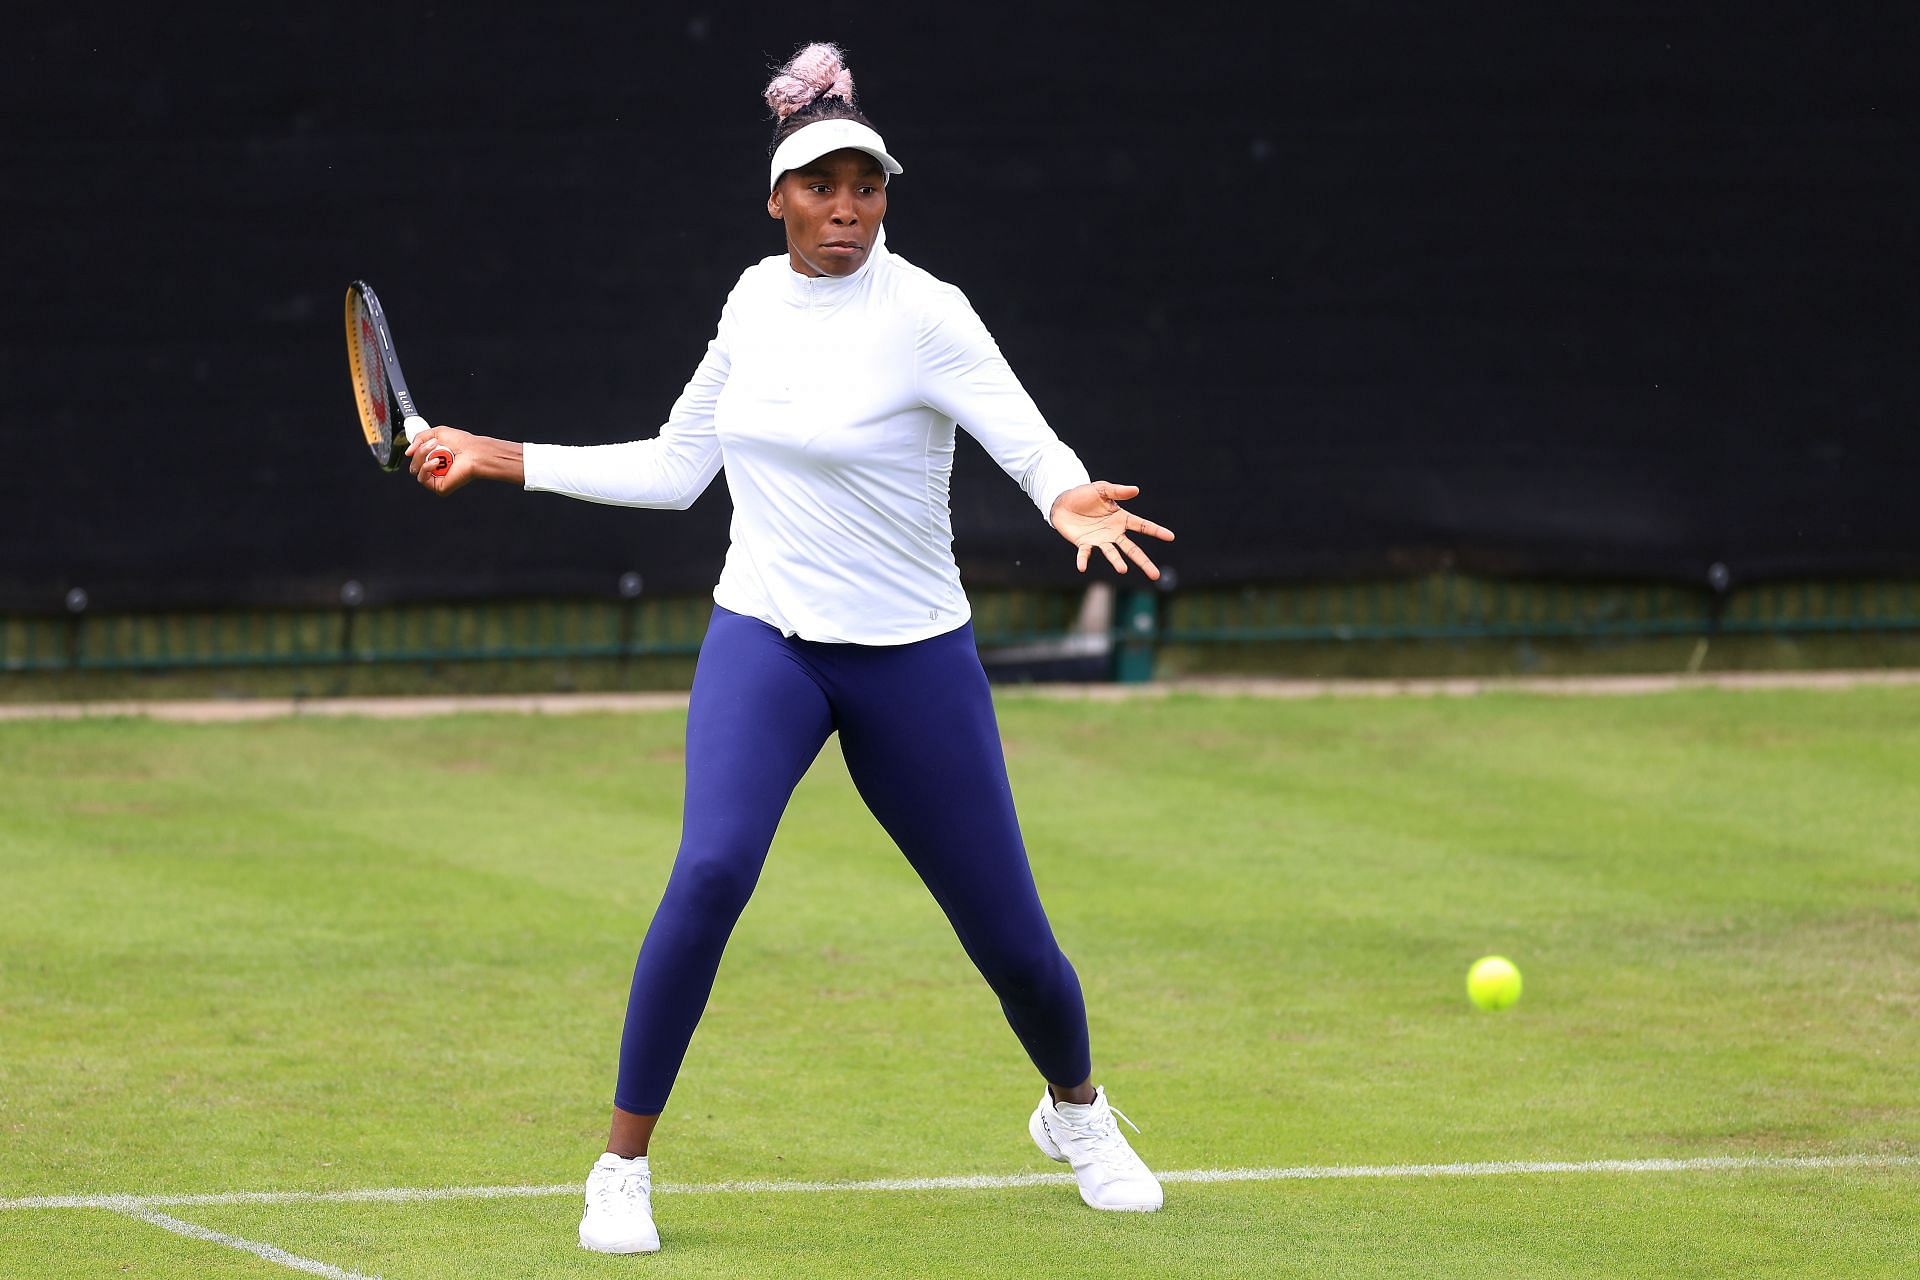 Venus Williams' next match: Opponent, venue, live streaming, TV channel and schedule | Rothesay Classic 2023, 1st round